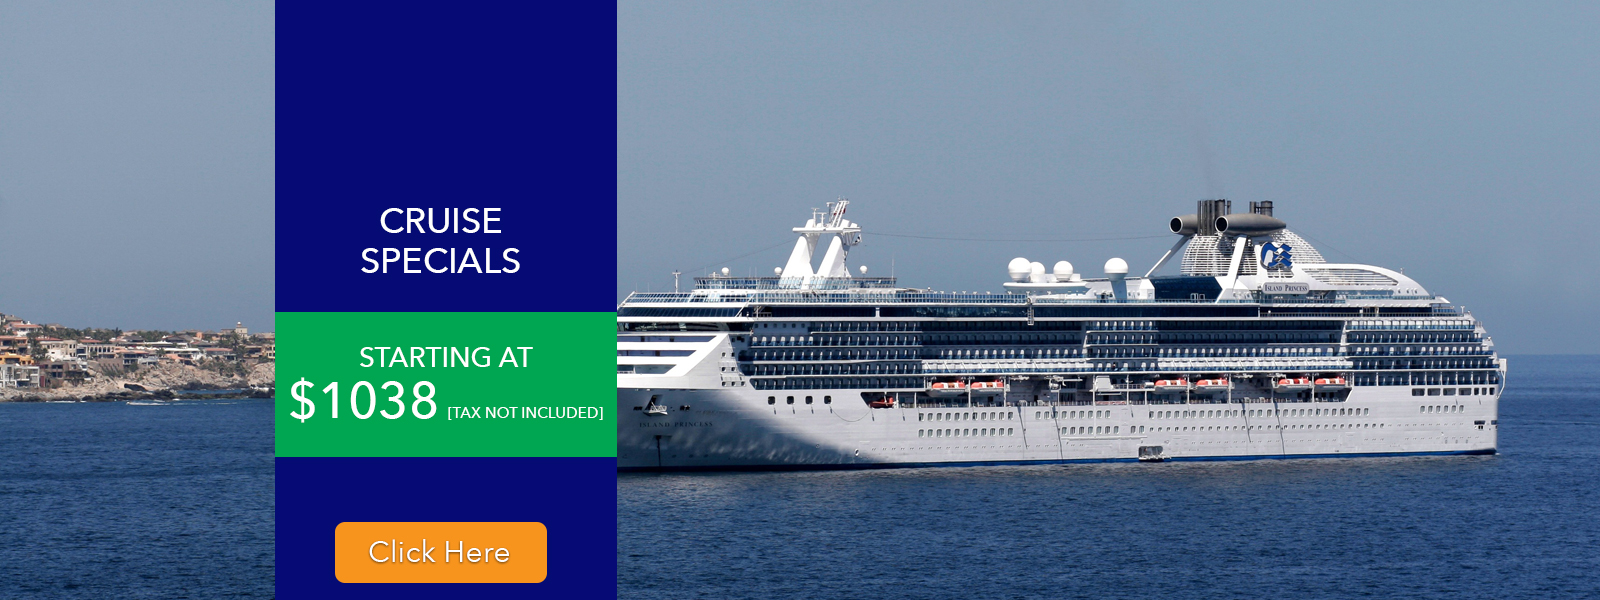 Cruise Specials | Cruise Packages | Cruise Deals